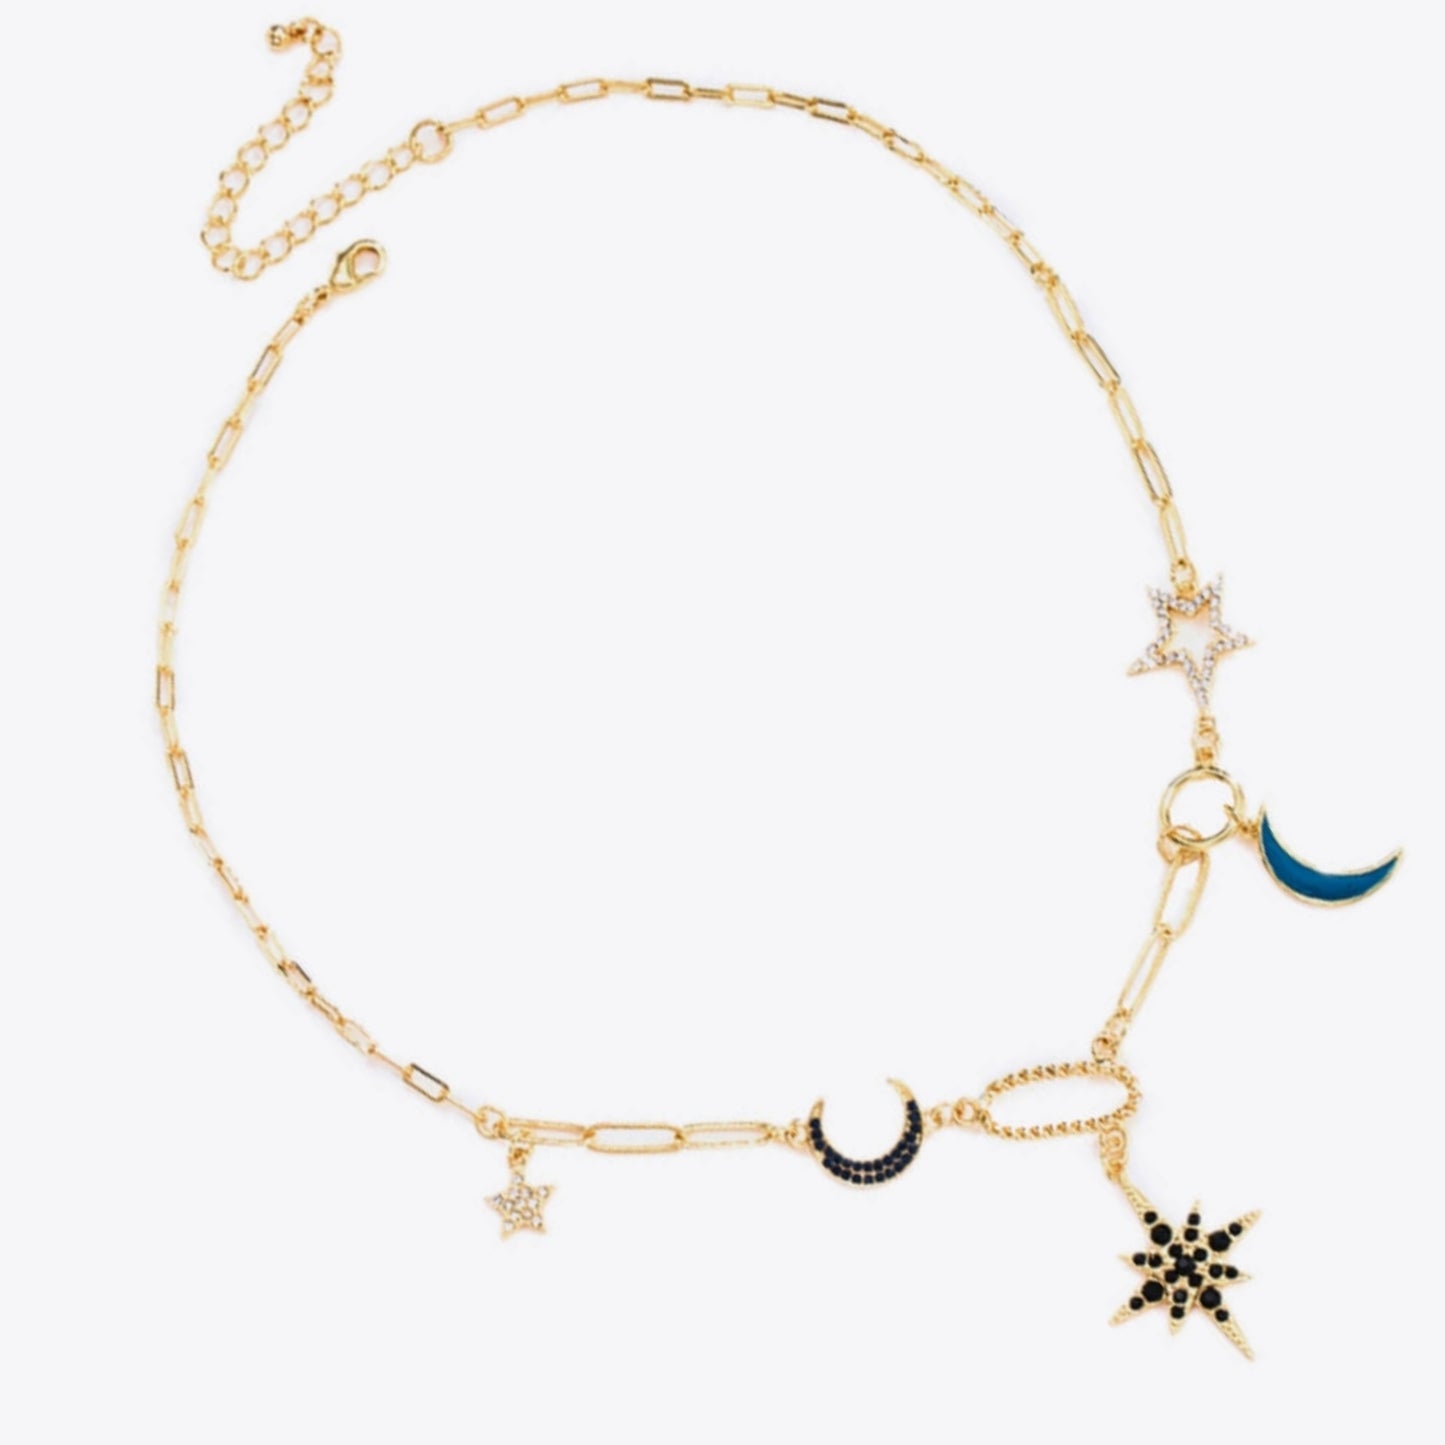 18K GOLD Plated Necklace Star and Moon Rhinestone Milti-link Chain